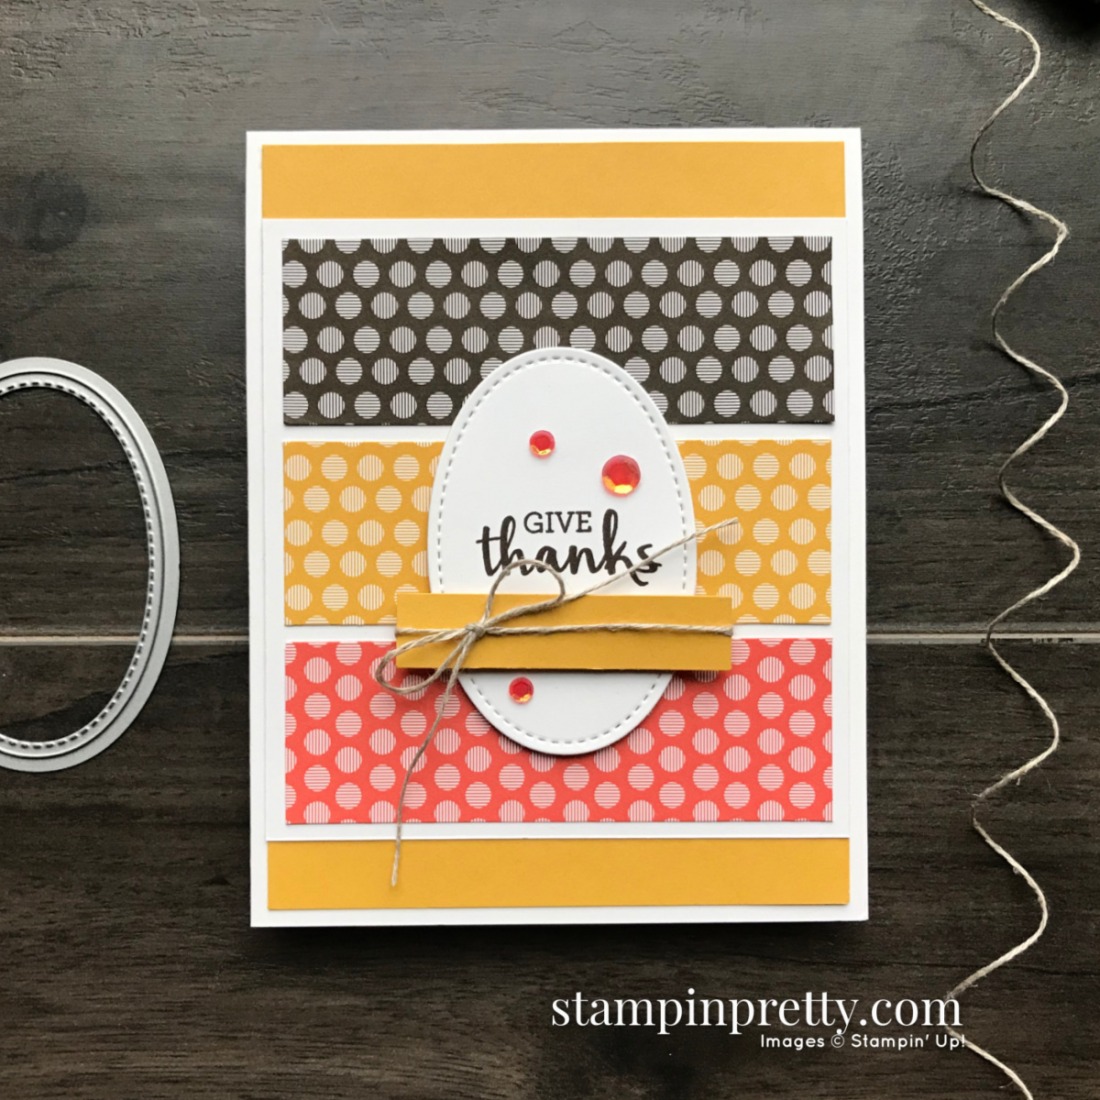 Create this card using the Arrange a Wreath Stamp Set & 6x6 Designer Series Paper from Stampin' Up! Card my Mary Fish, Stampin' Pretty